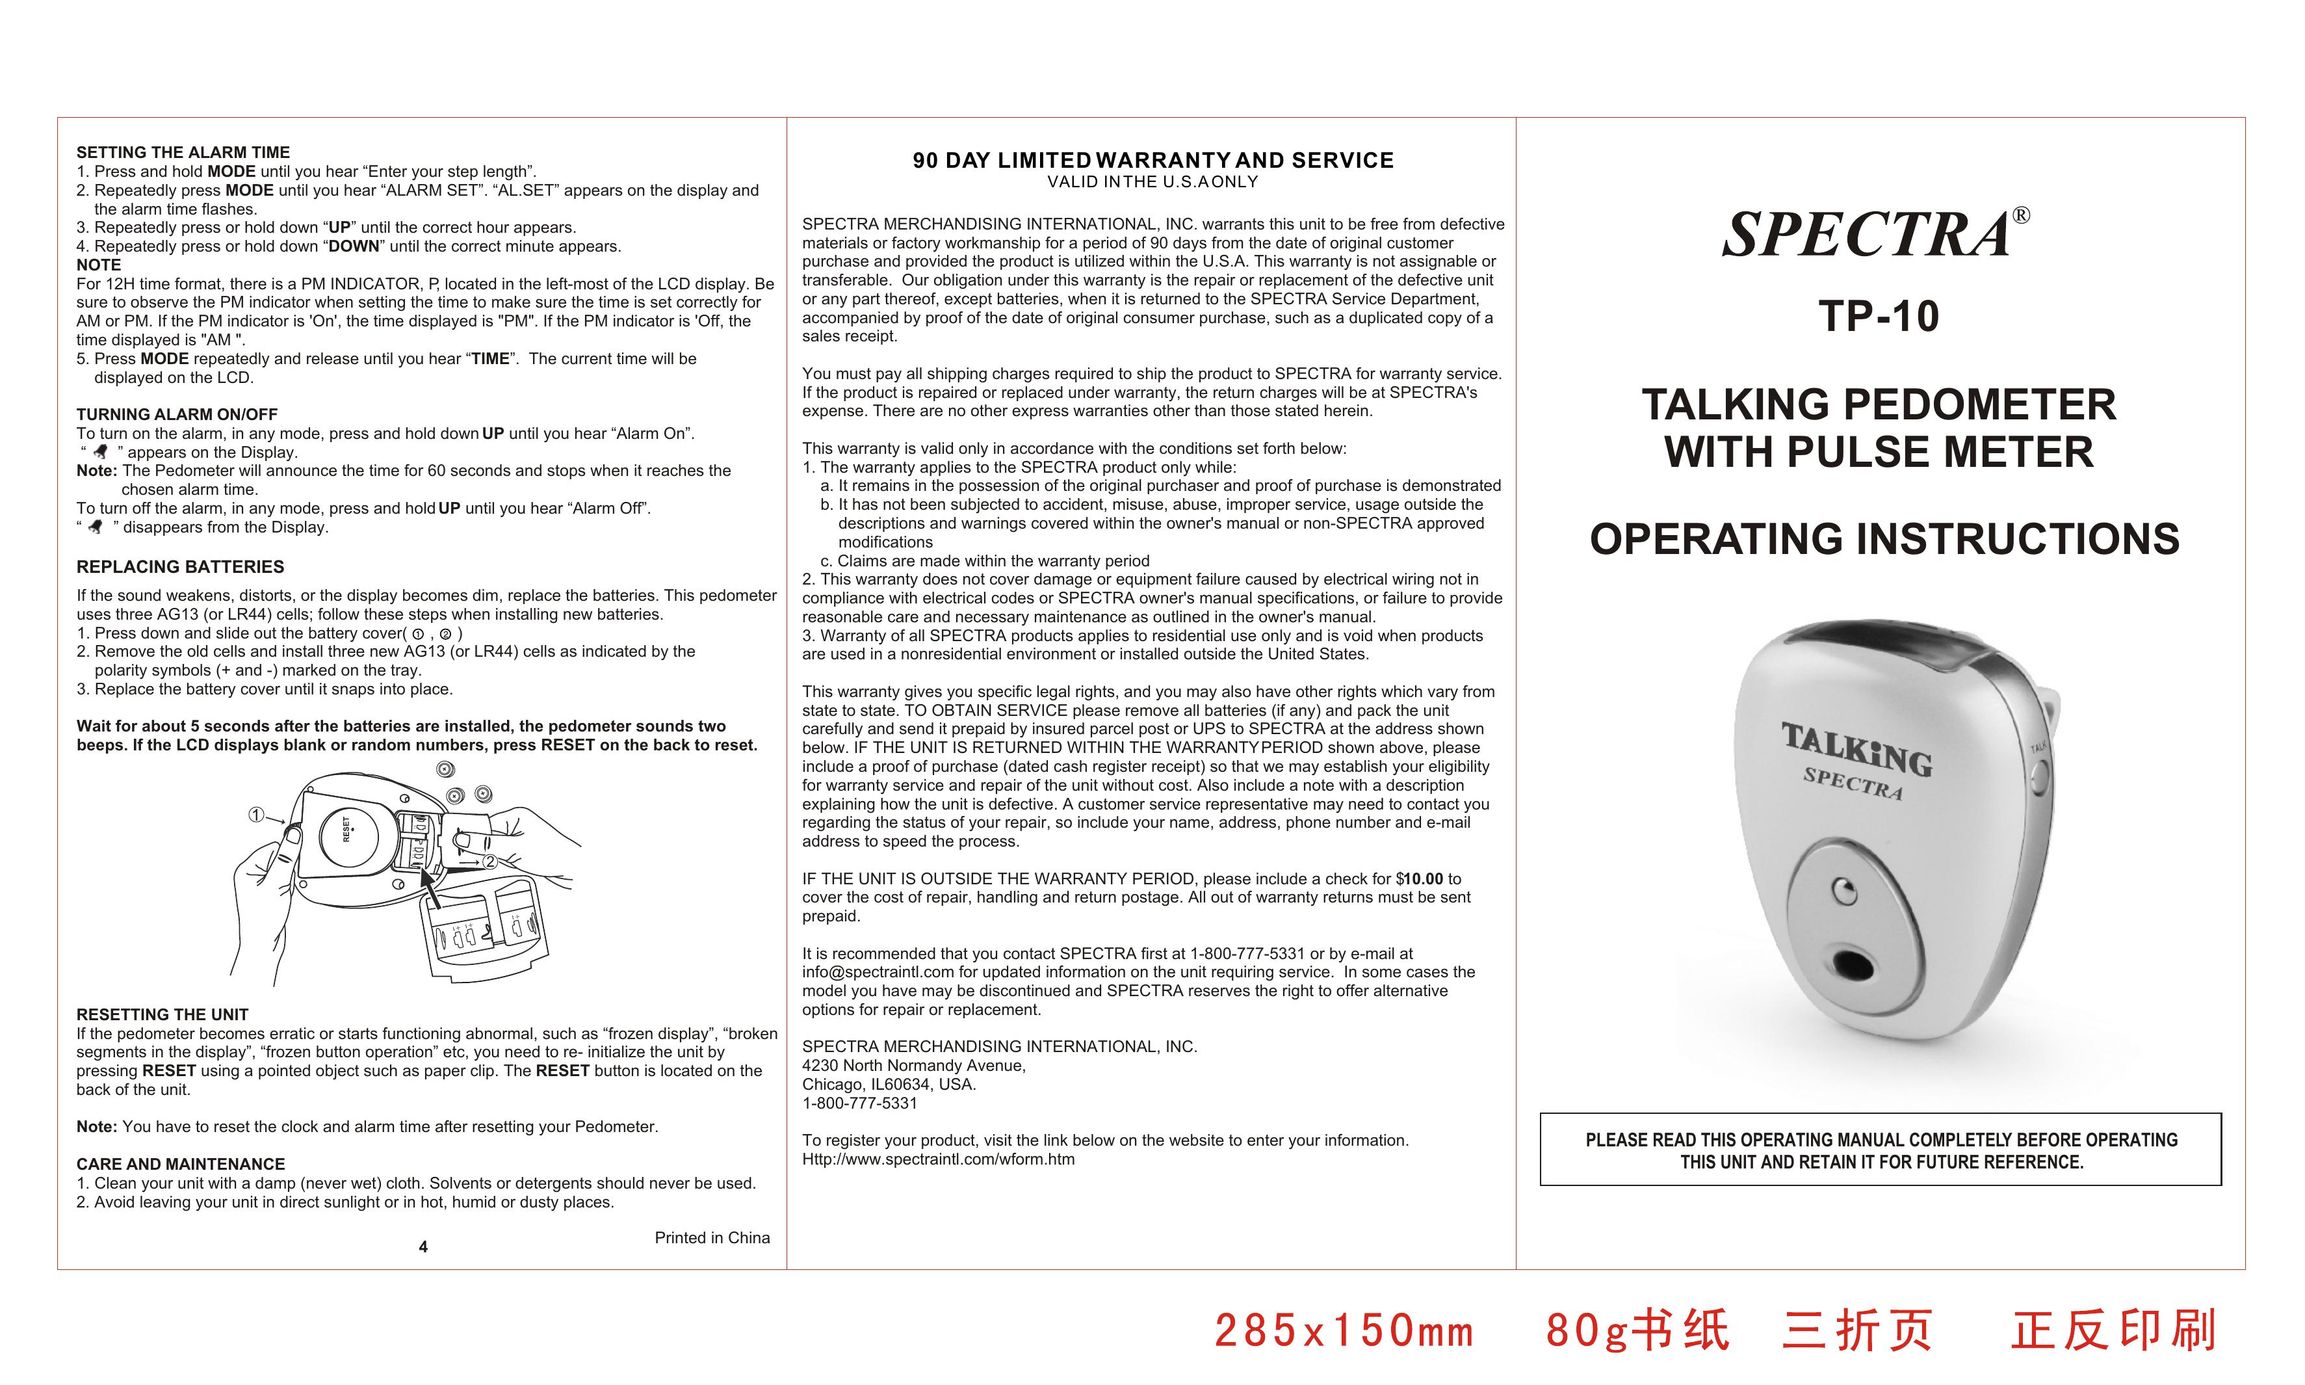 Spectra TP-10 Fitness Electronics User Manual